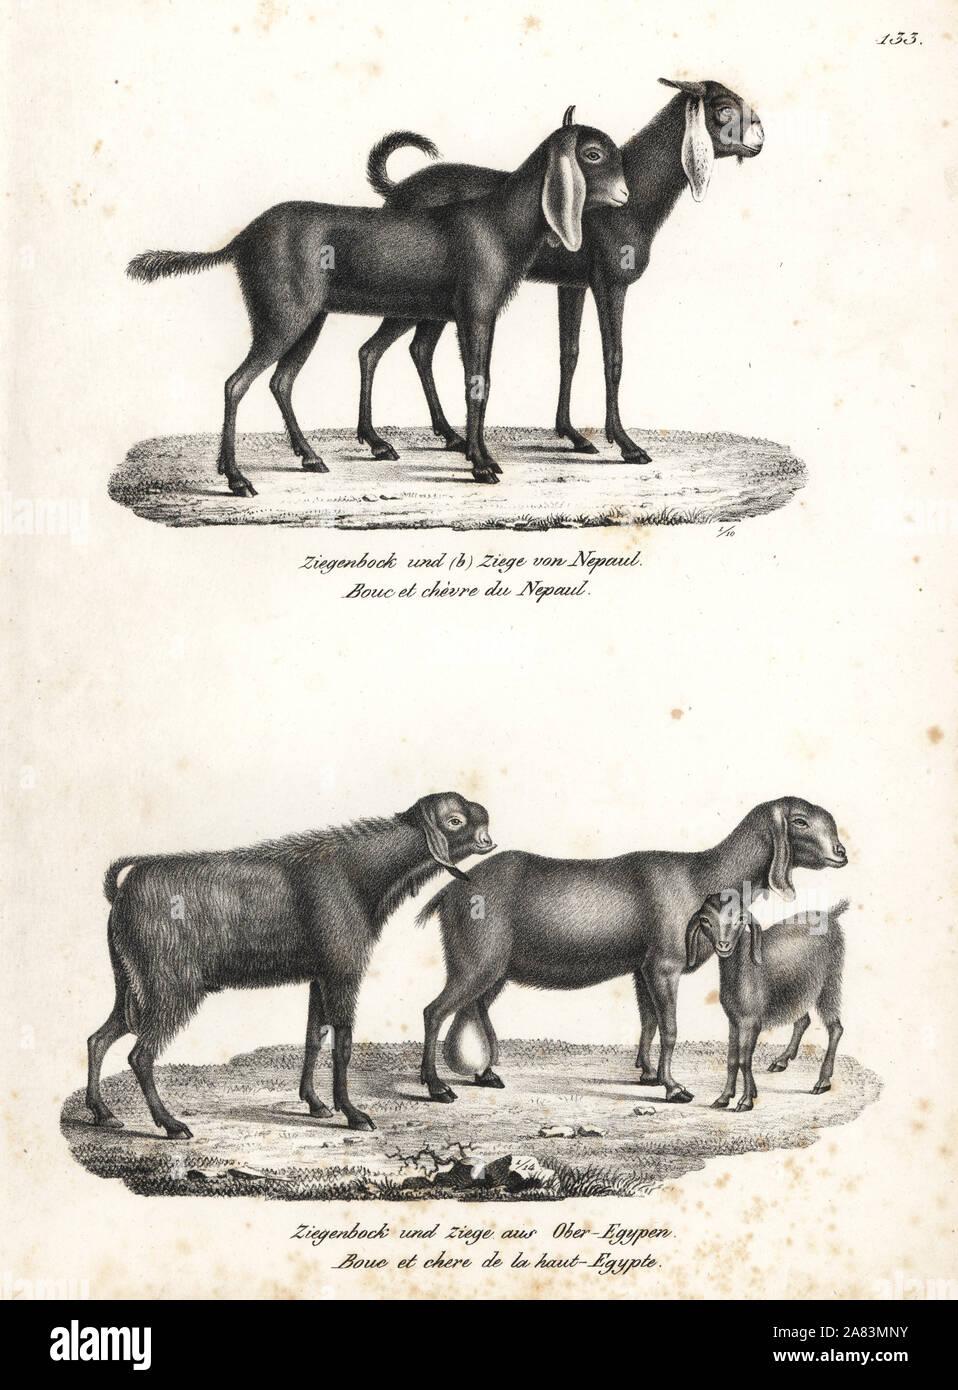 Nepal goat, Capra hircus nepalensis, and Egyptian goat, Capra nubiana. Lithograph by Karl Joseph Brodtmann from Heinrich Rudolf Schinz's Illustrated Natural History of Men and Animals, 1836. Stock Photo